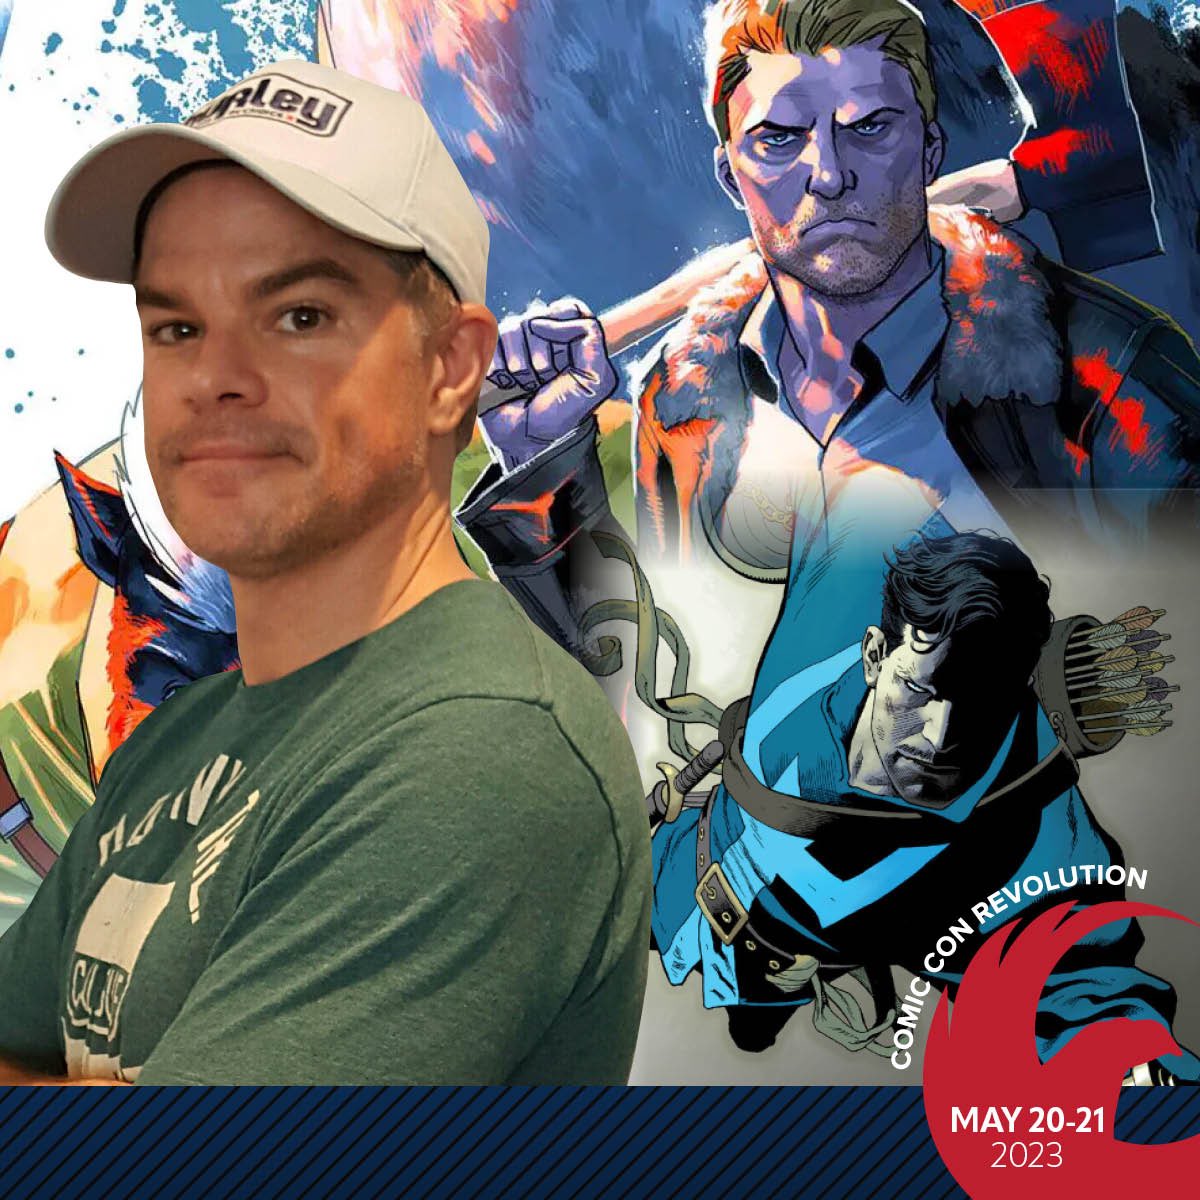 Hey everyone! I’ll be at @ComicConRvltn next weekend May 20th. Sitting next to @dotproblems & @vondurabo 
Here’s the link check out to see who else will be there.

comicconrevolution.com/ontario/index.…

@CoolComicArt @MrNiceGuy513 @AaronMeyers